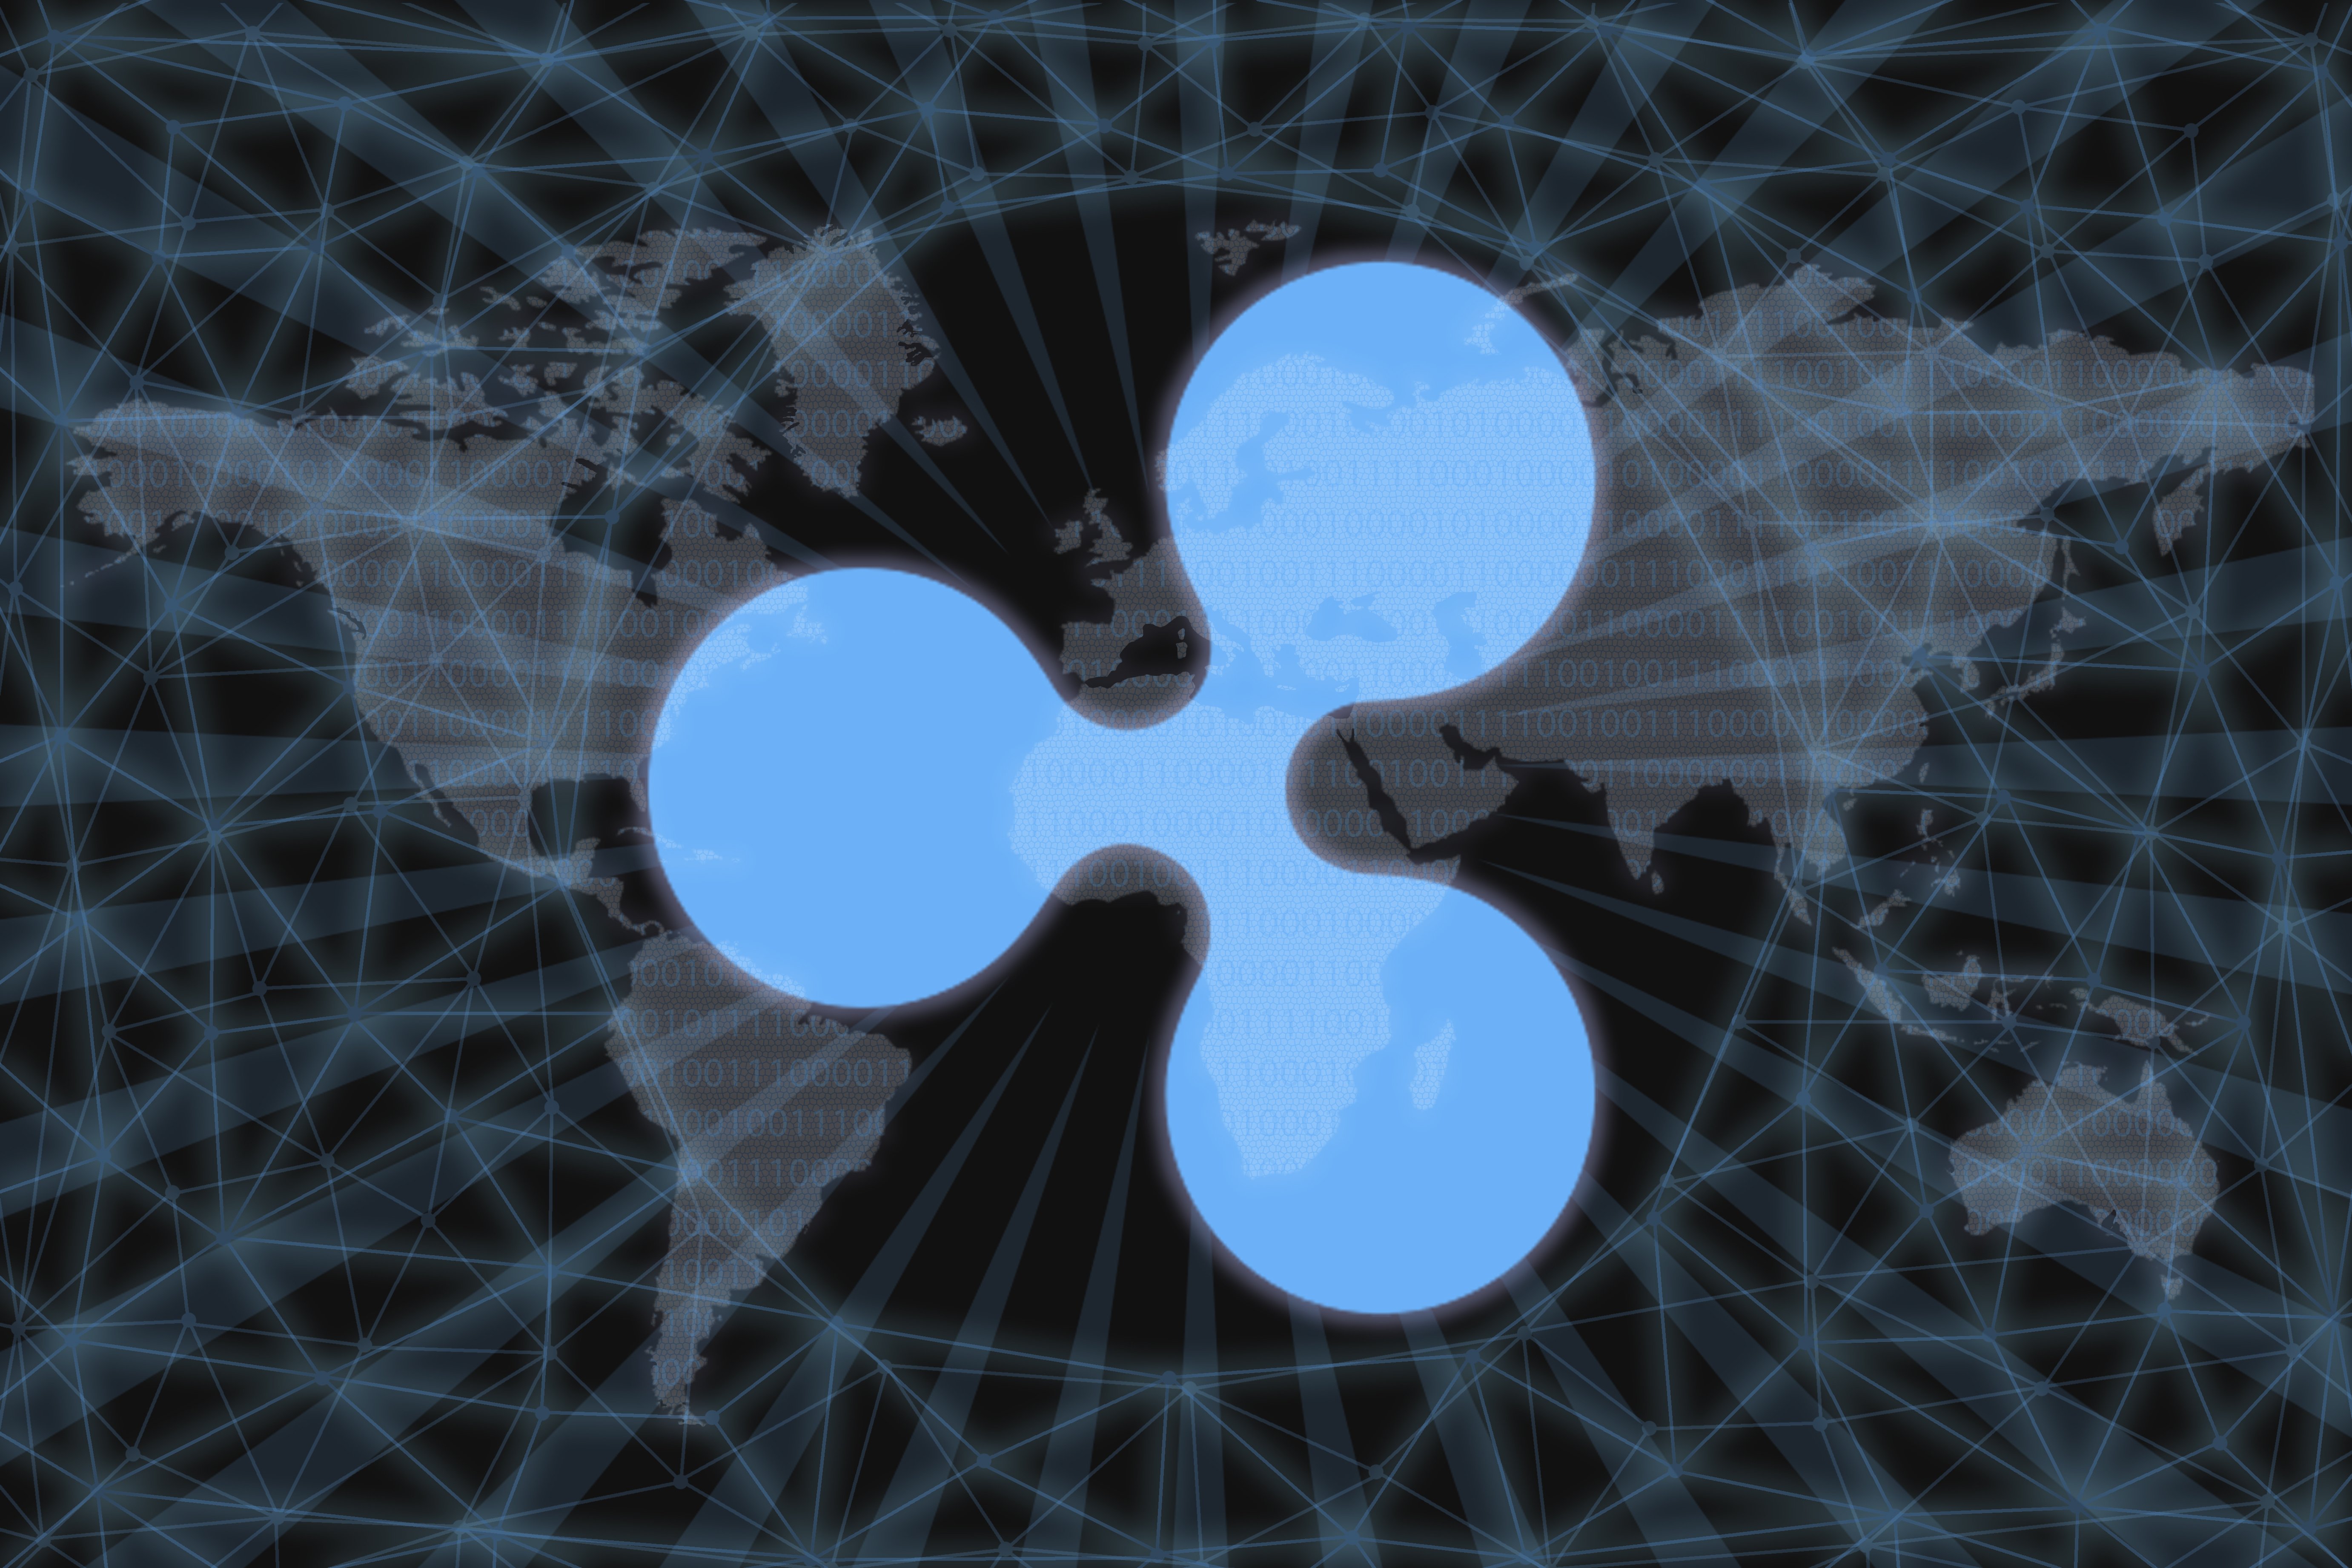 XRP Price in the Red as Ripple Unlocks 1 Billion Tokens From Its Escrow Wallet